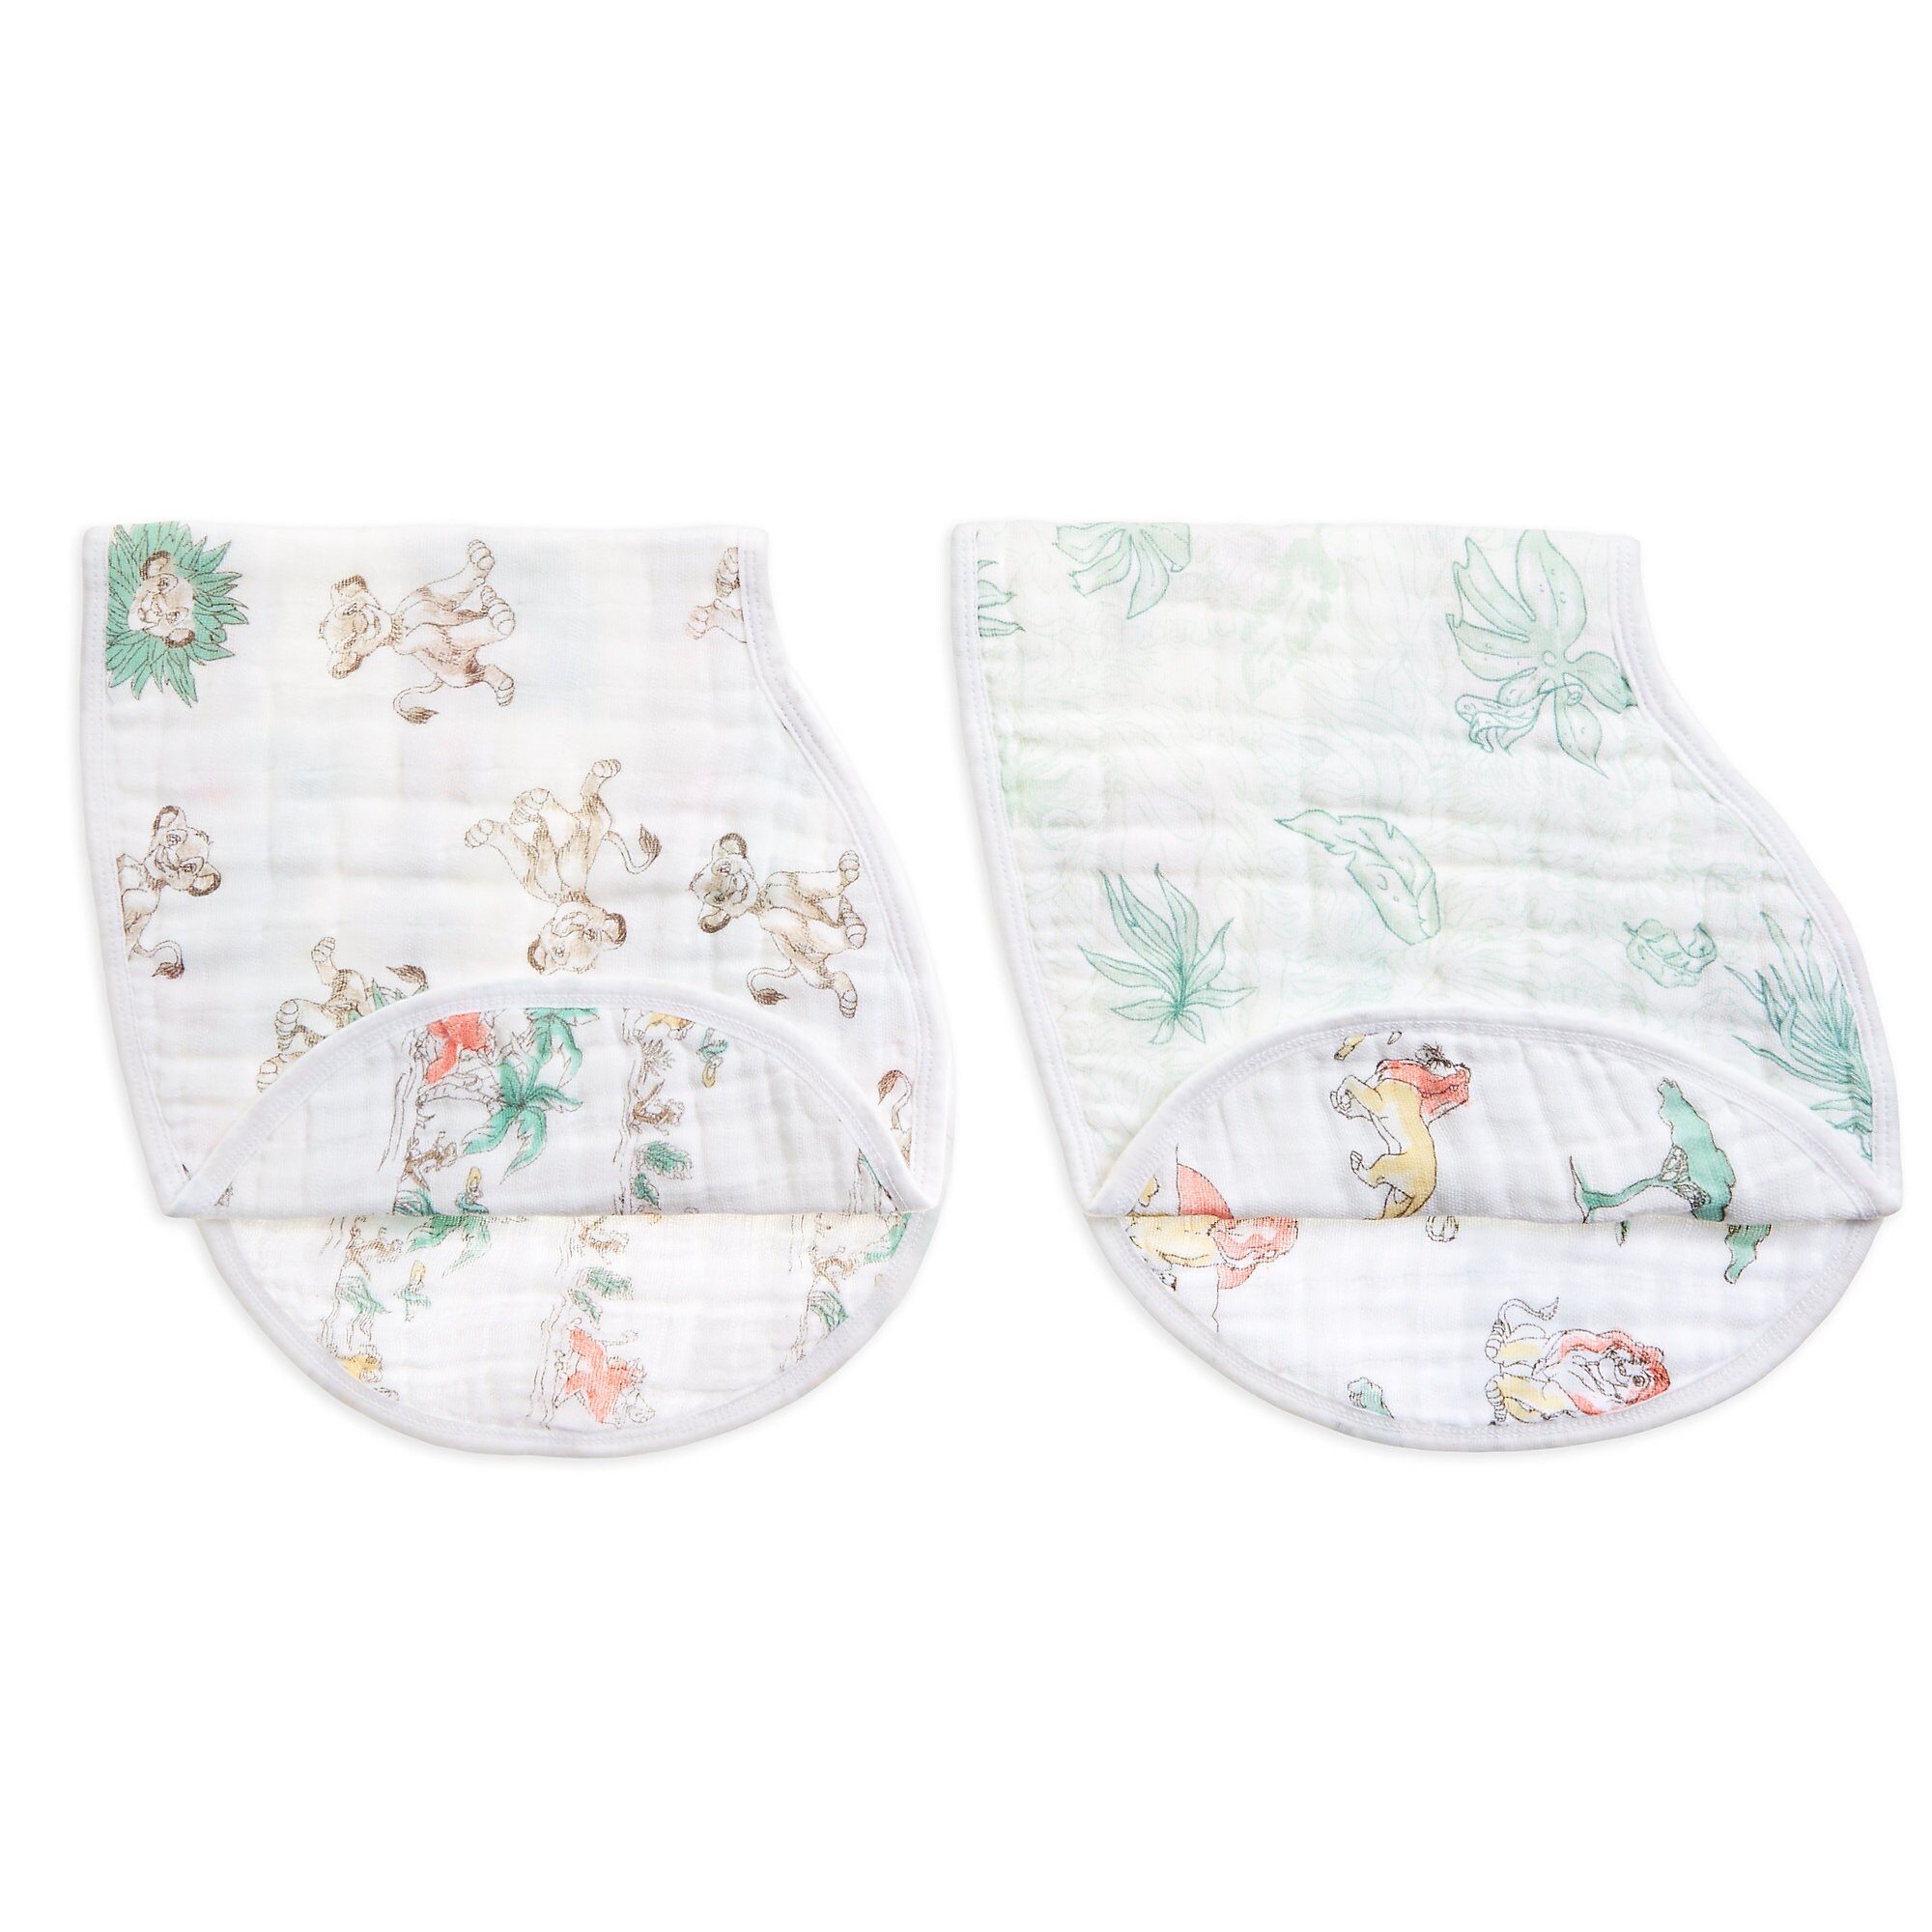 The Lion King Burpy Bibs Set for Baby by aden + anais®